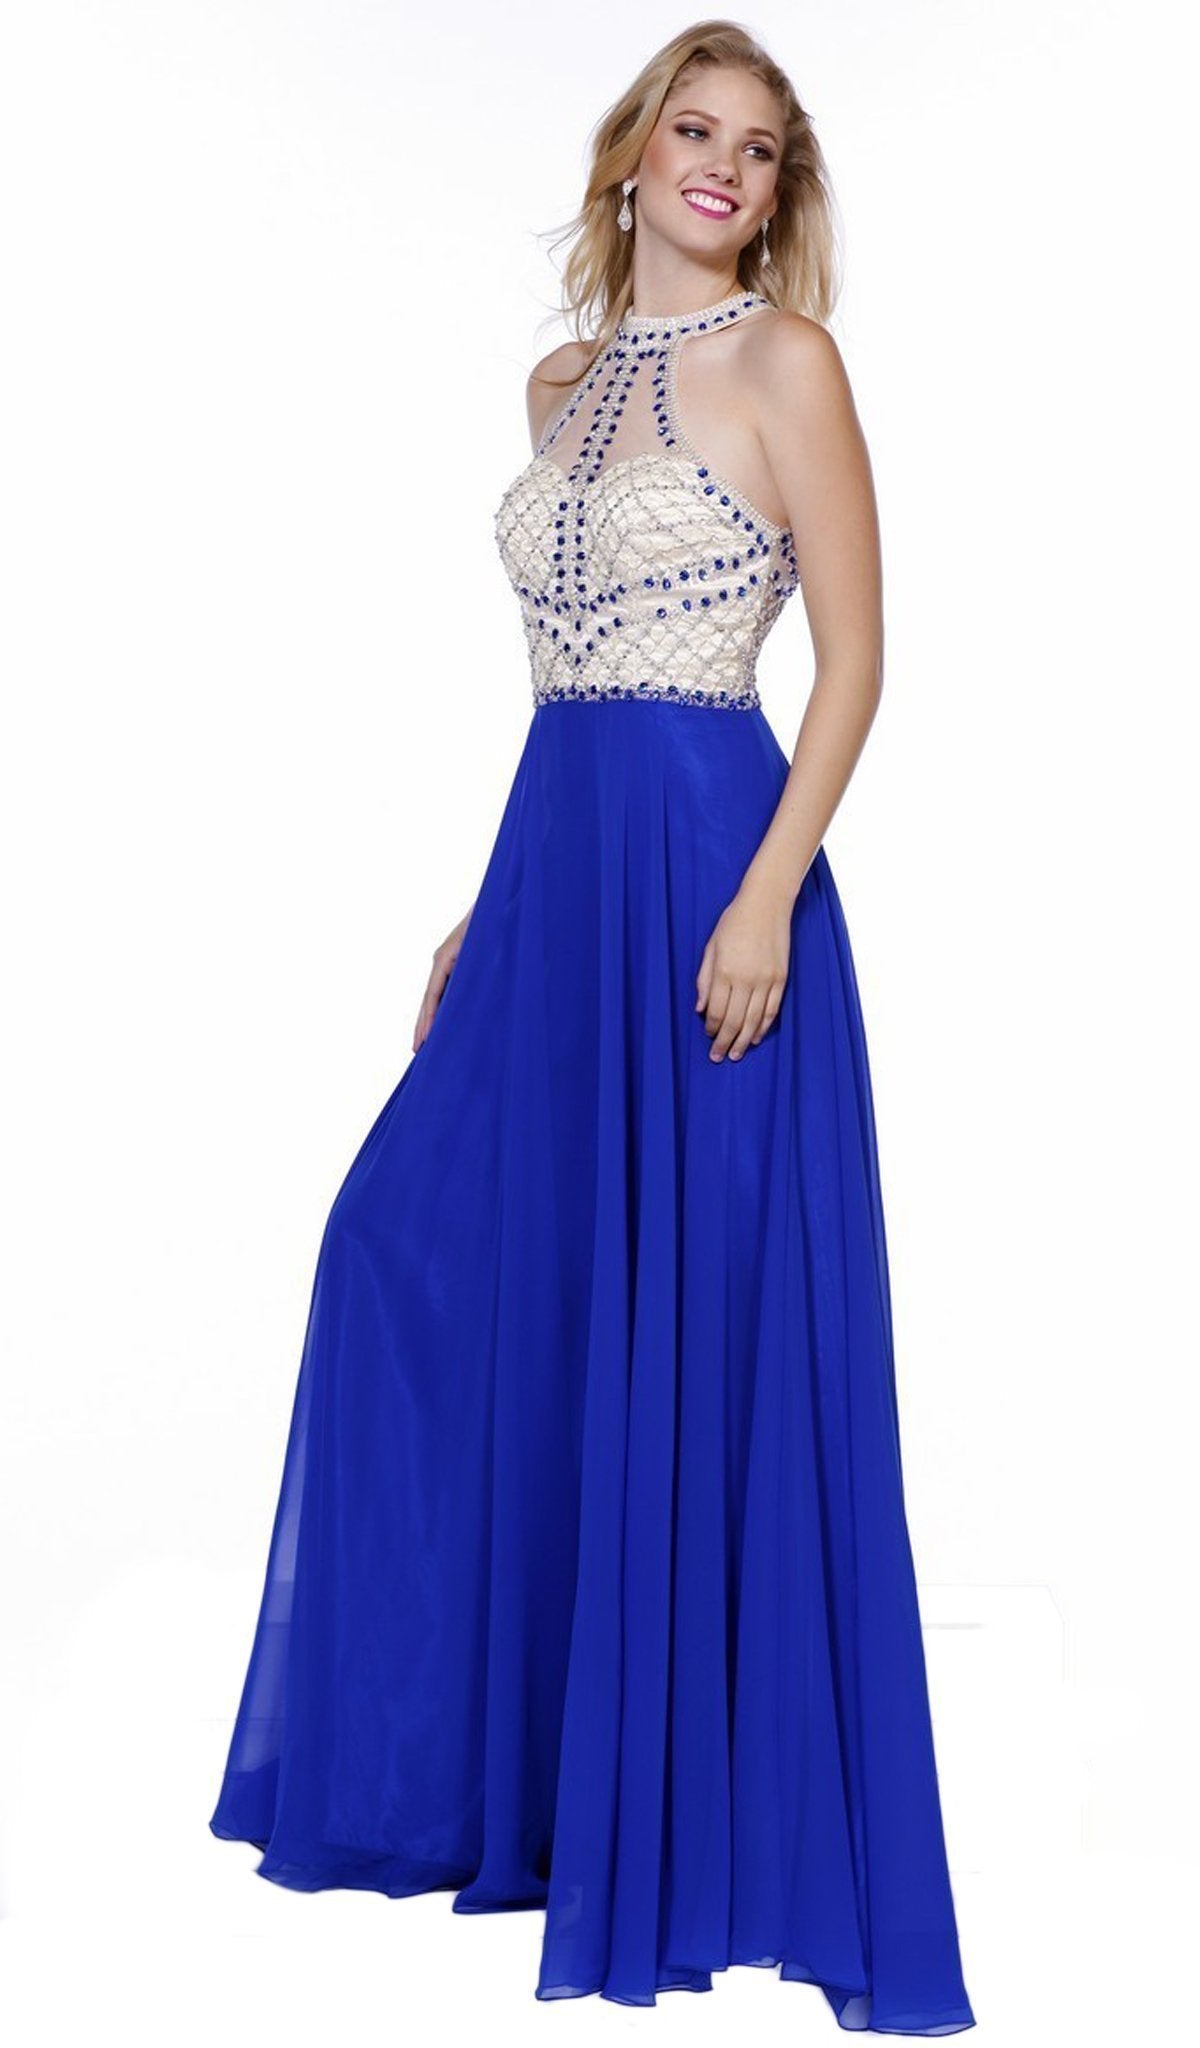 Nox Anabel - 8201 Beaded Sleeveless Halter Long Gown Special Occasion Dress XS / Royal Blue